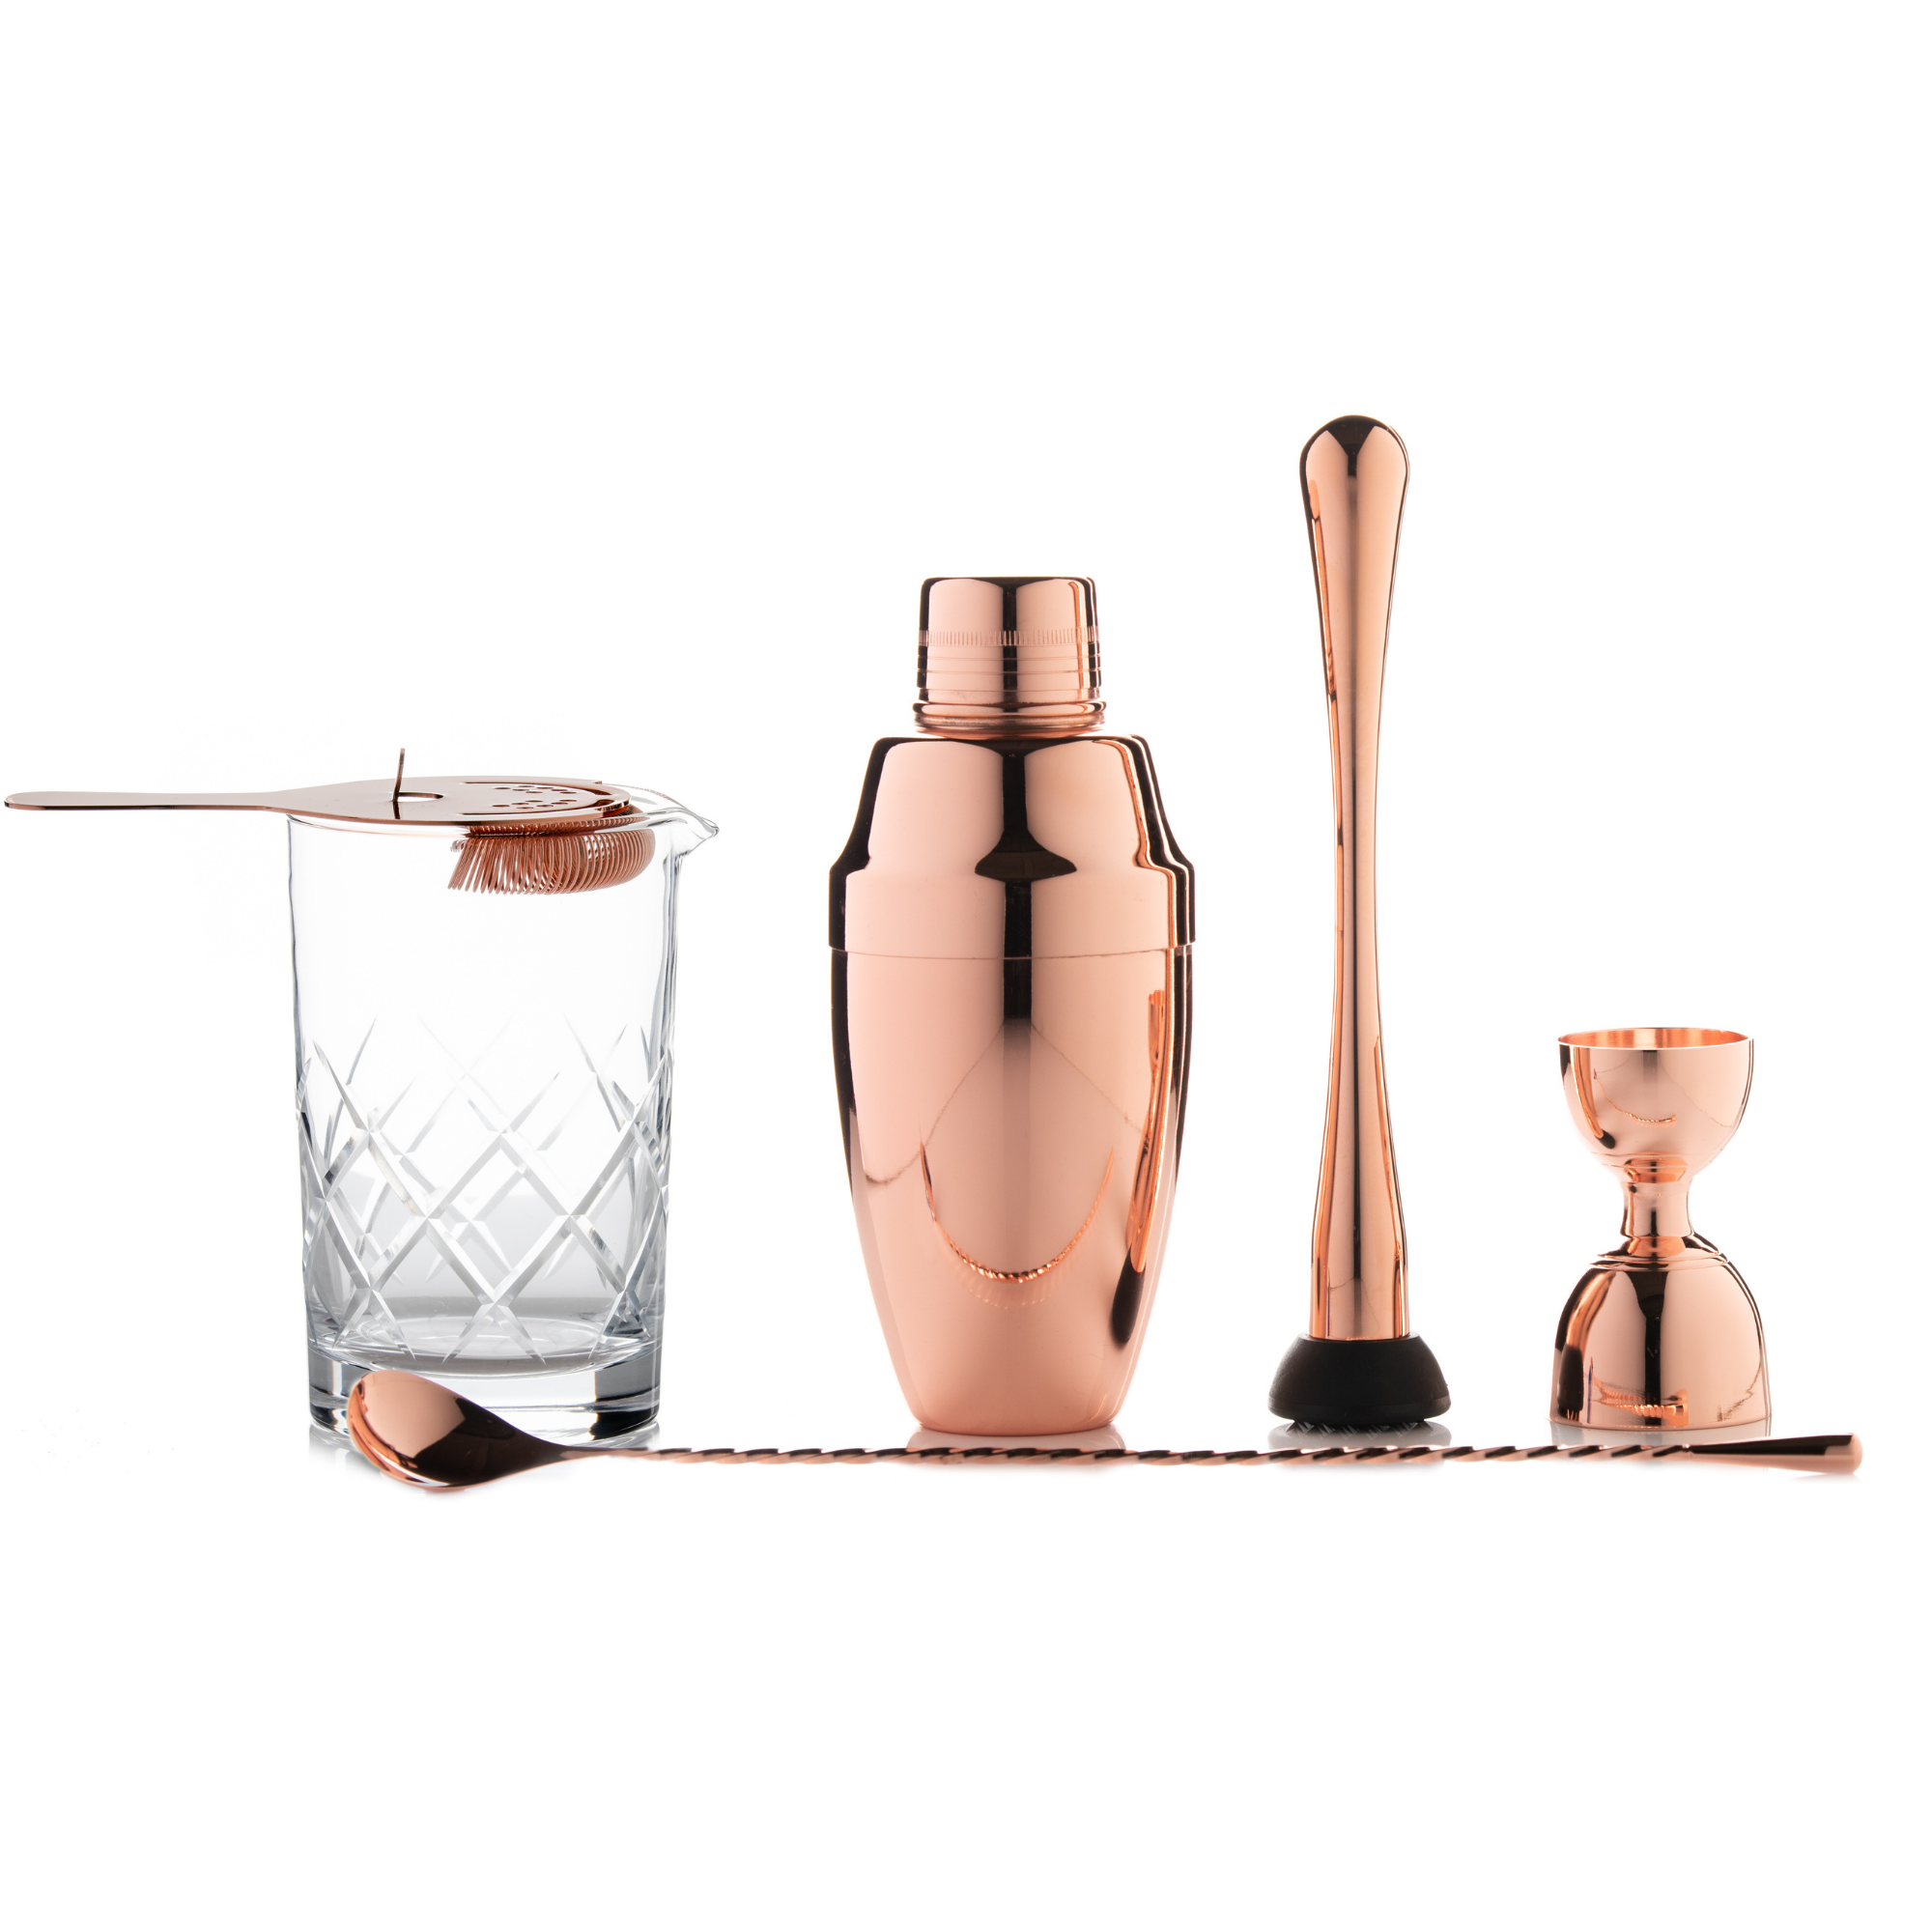 Deluxe Copper Bar Tools Set with Cobbler